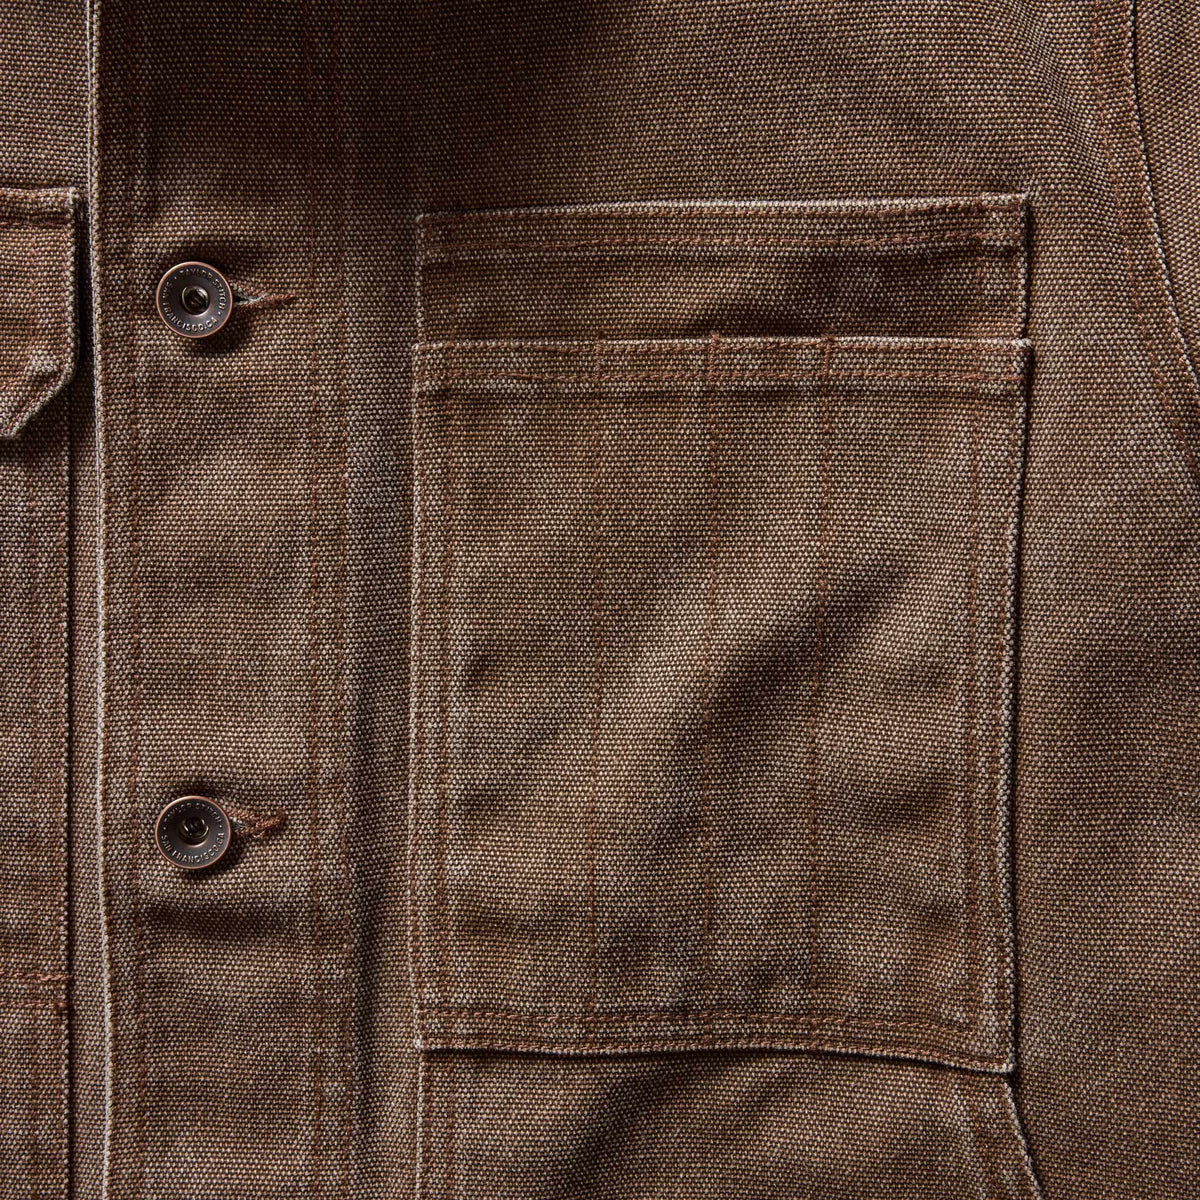 The Longshore Jacket in Aged Penny Chipped Canvas